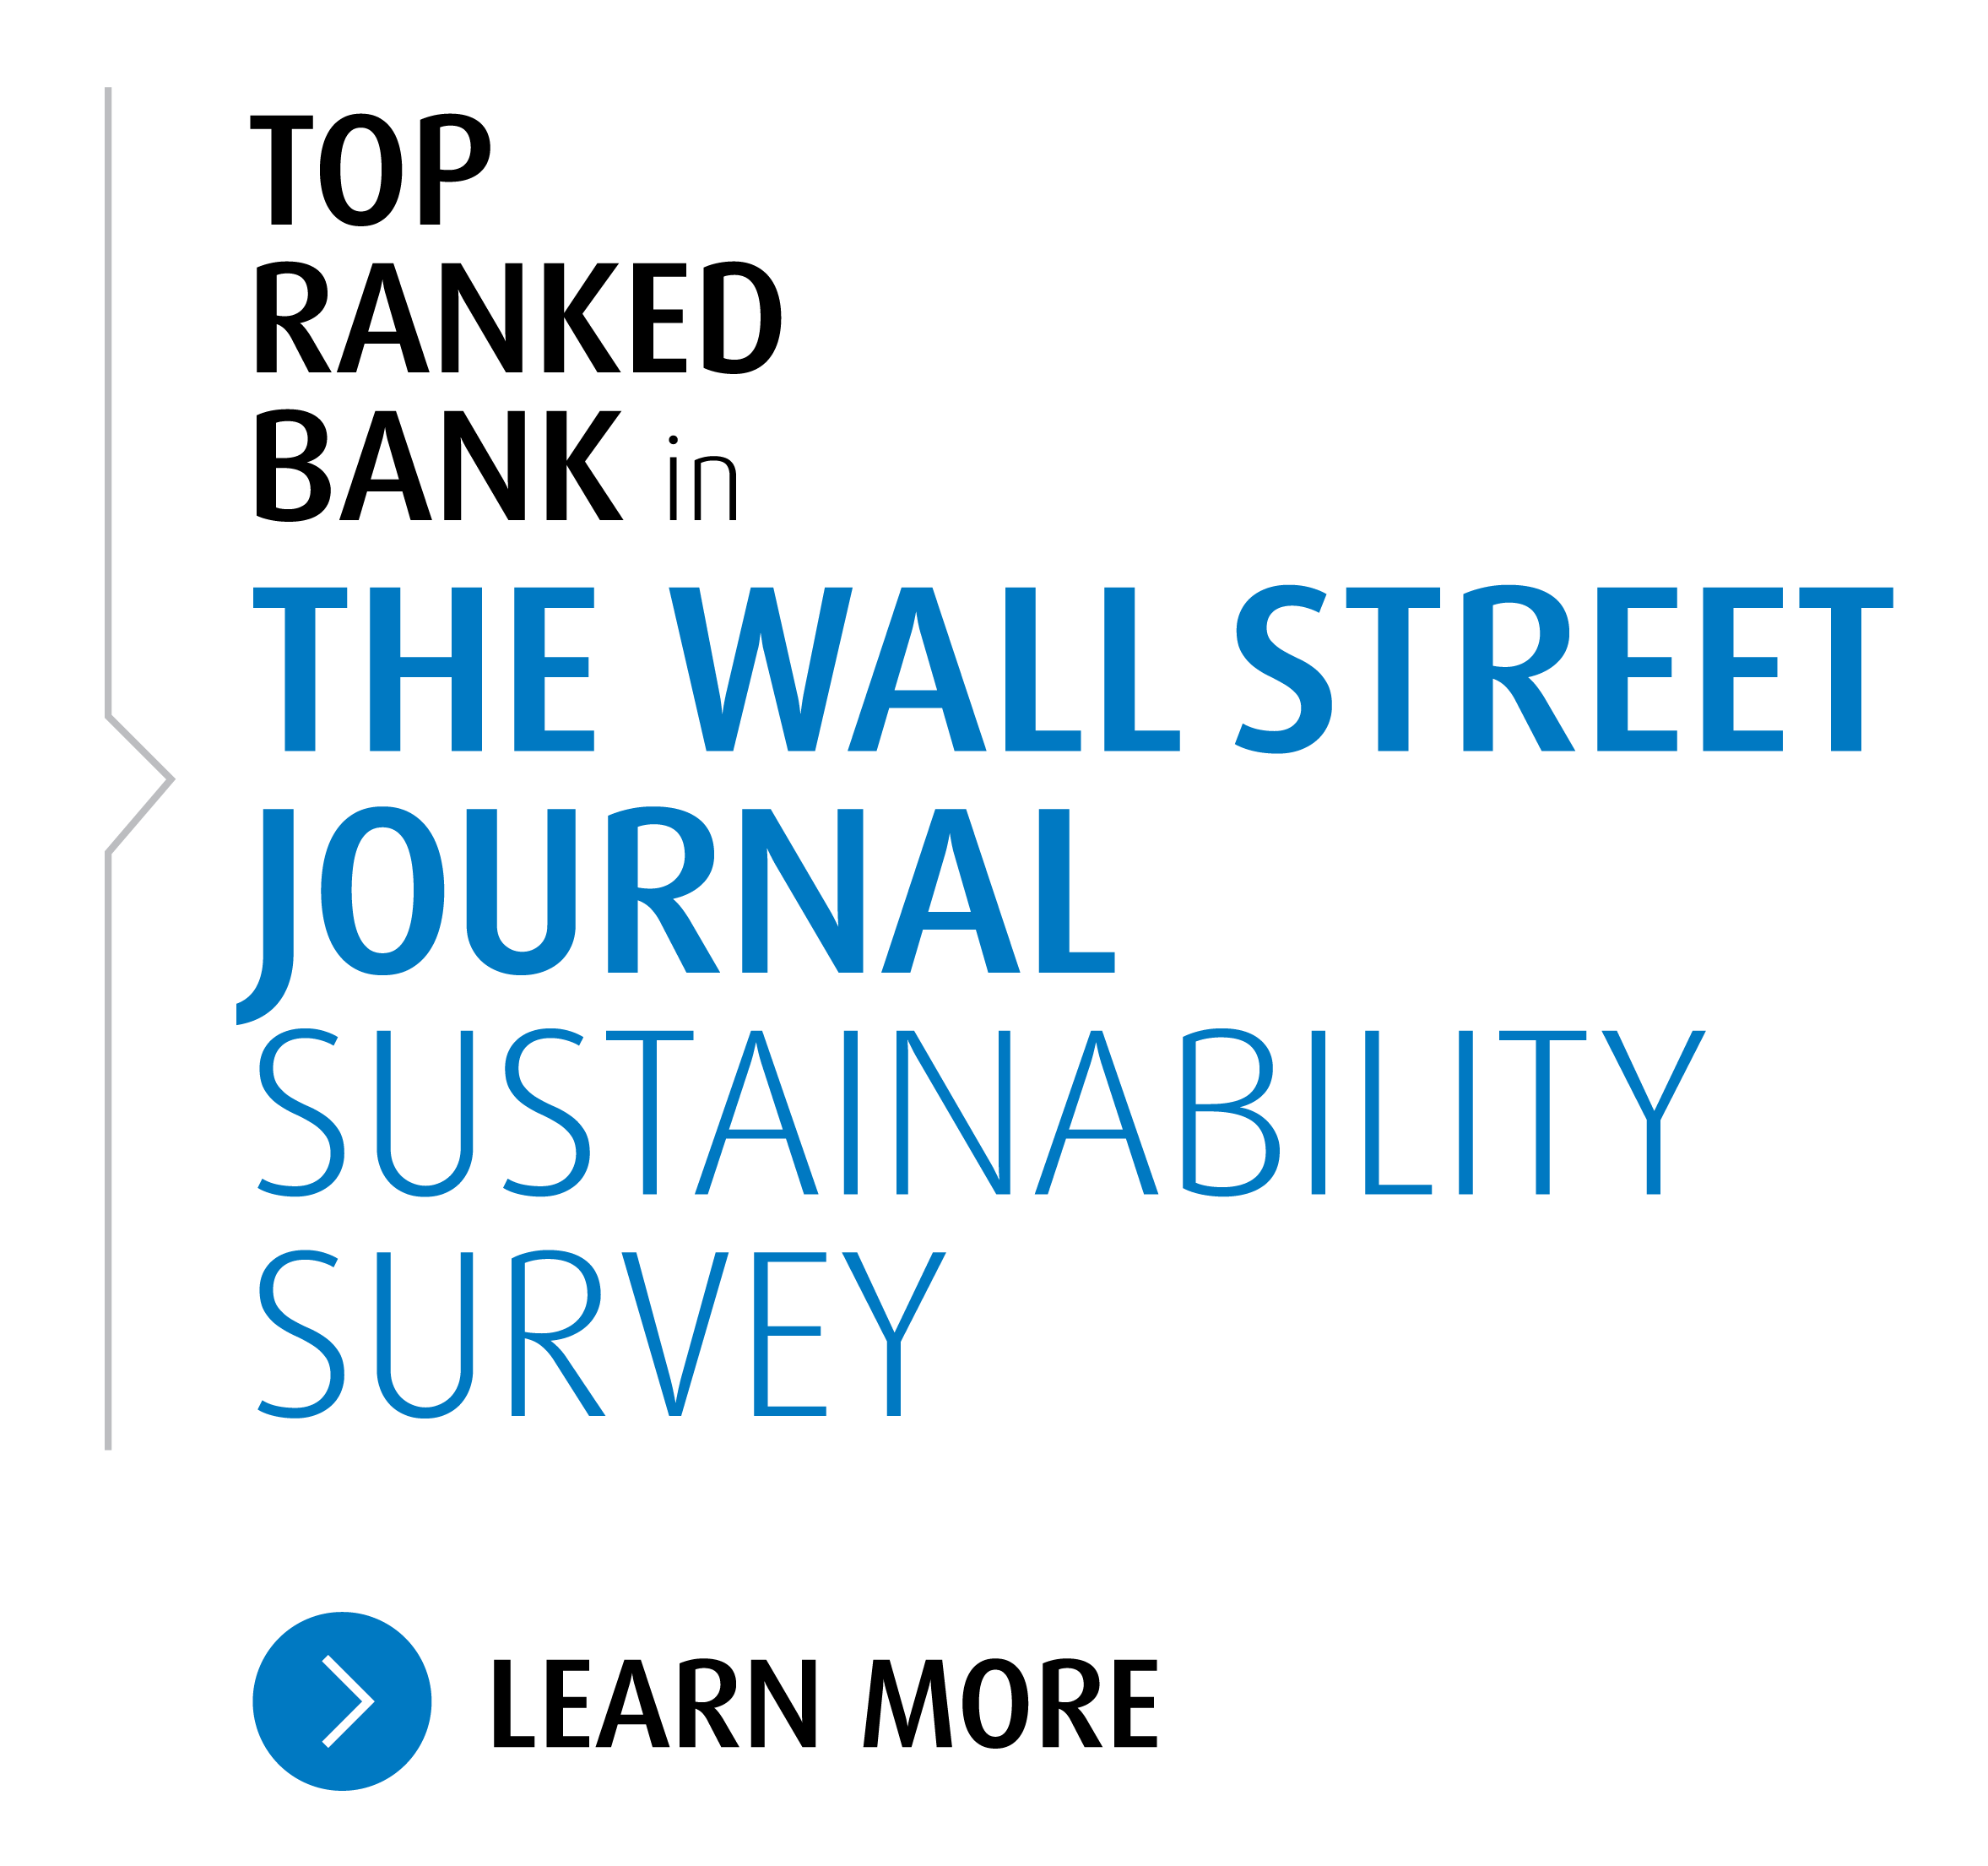 Top Ranked Bank in The Wall Street Journal Sustainability Survey. Learn more here.